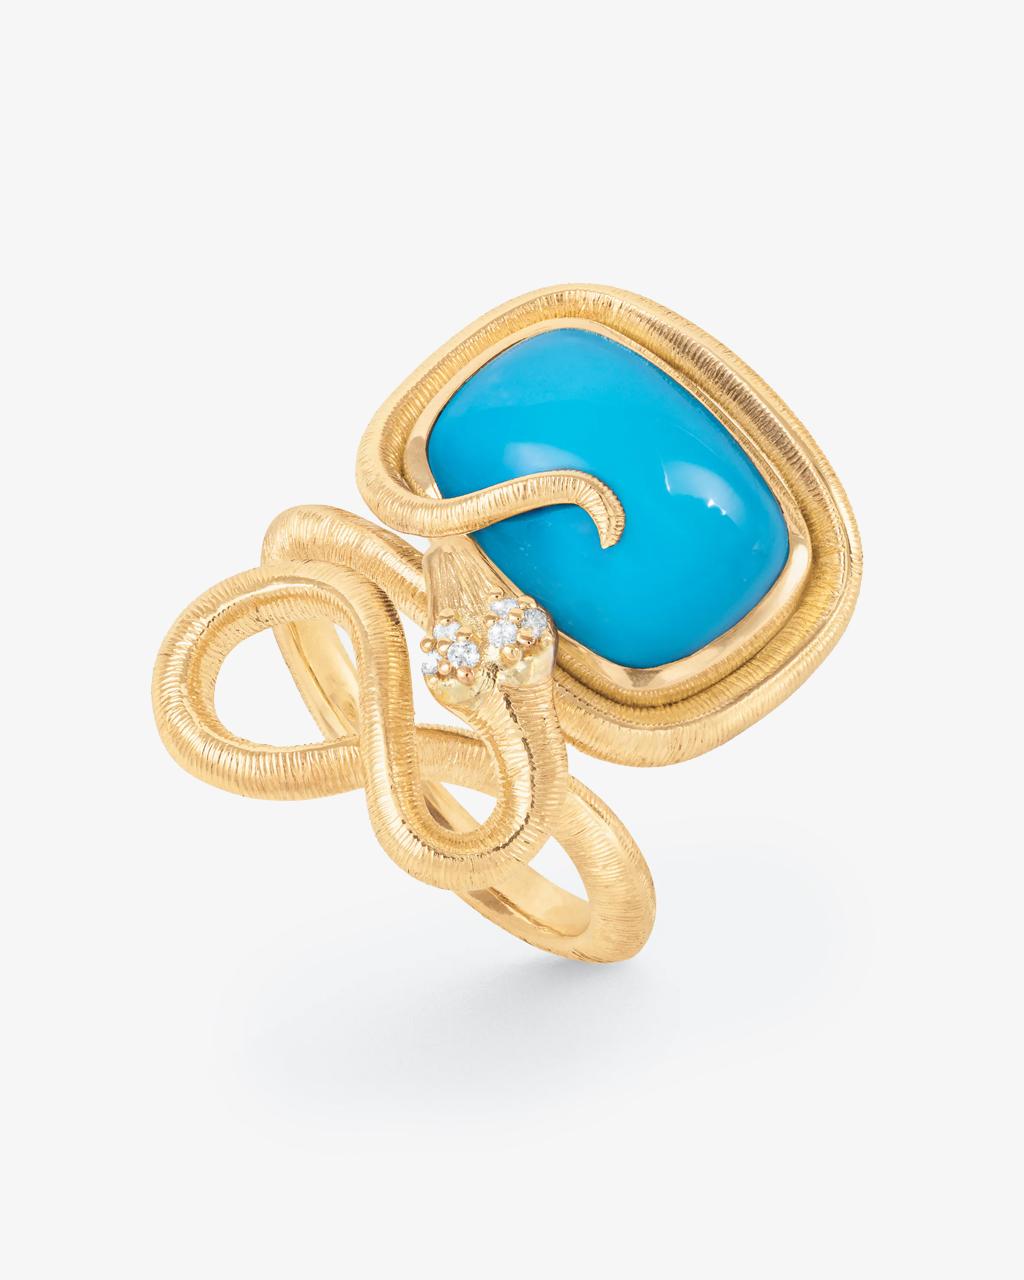 Ole Lynggaard 'Snakes' Turquoise Ring